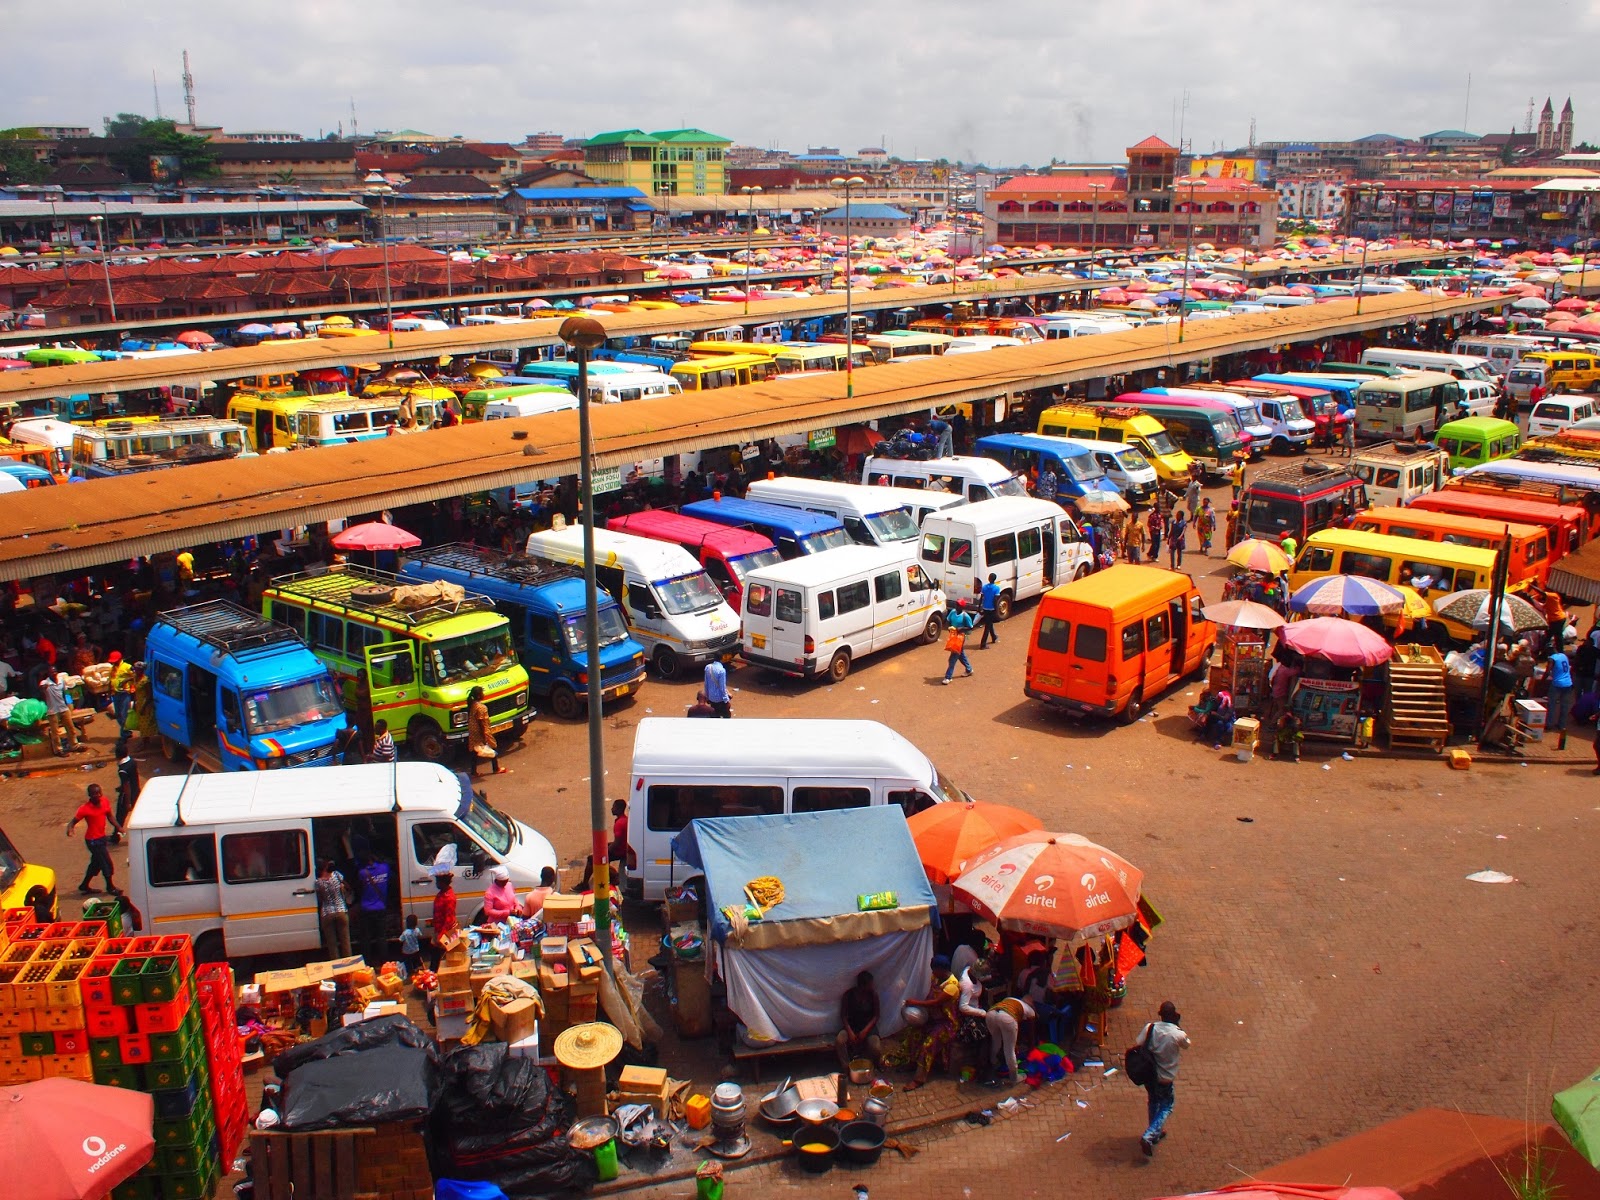 Don’t increase fares now – Transport operators warned